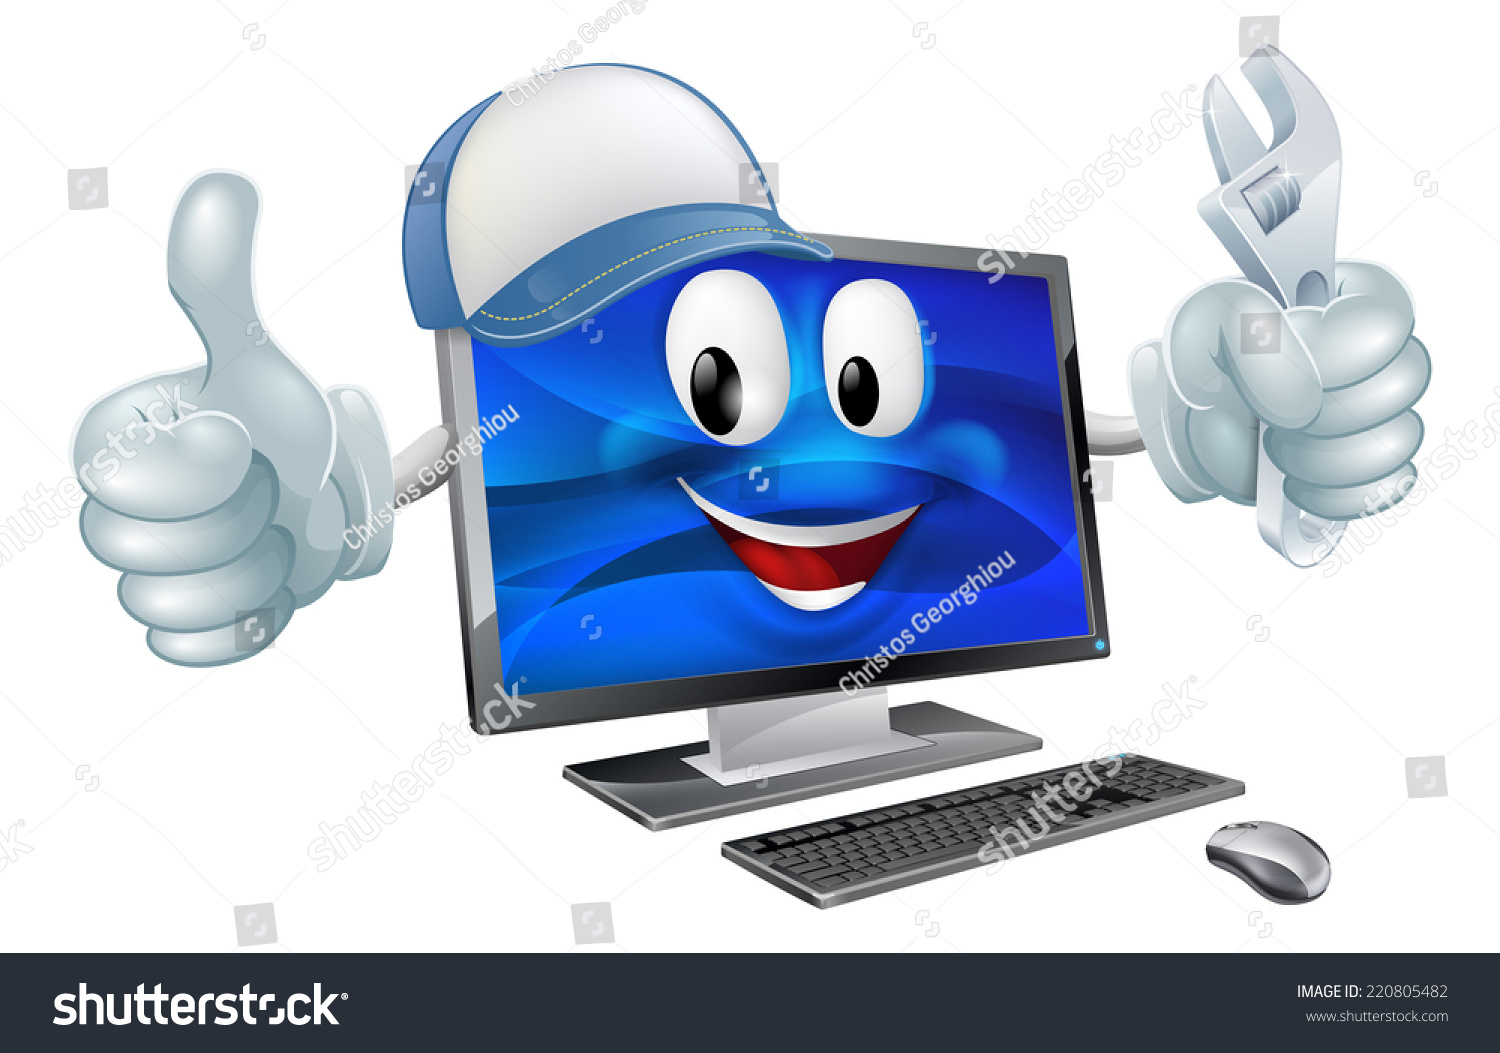 A Cartoon Computer Repair Mascot With A Cap And Spanner Doing A Thumbs ...